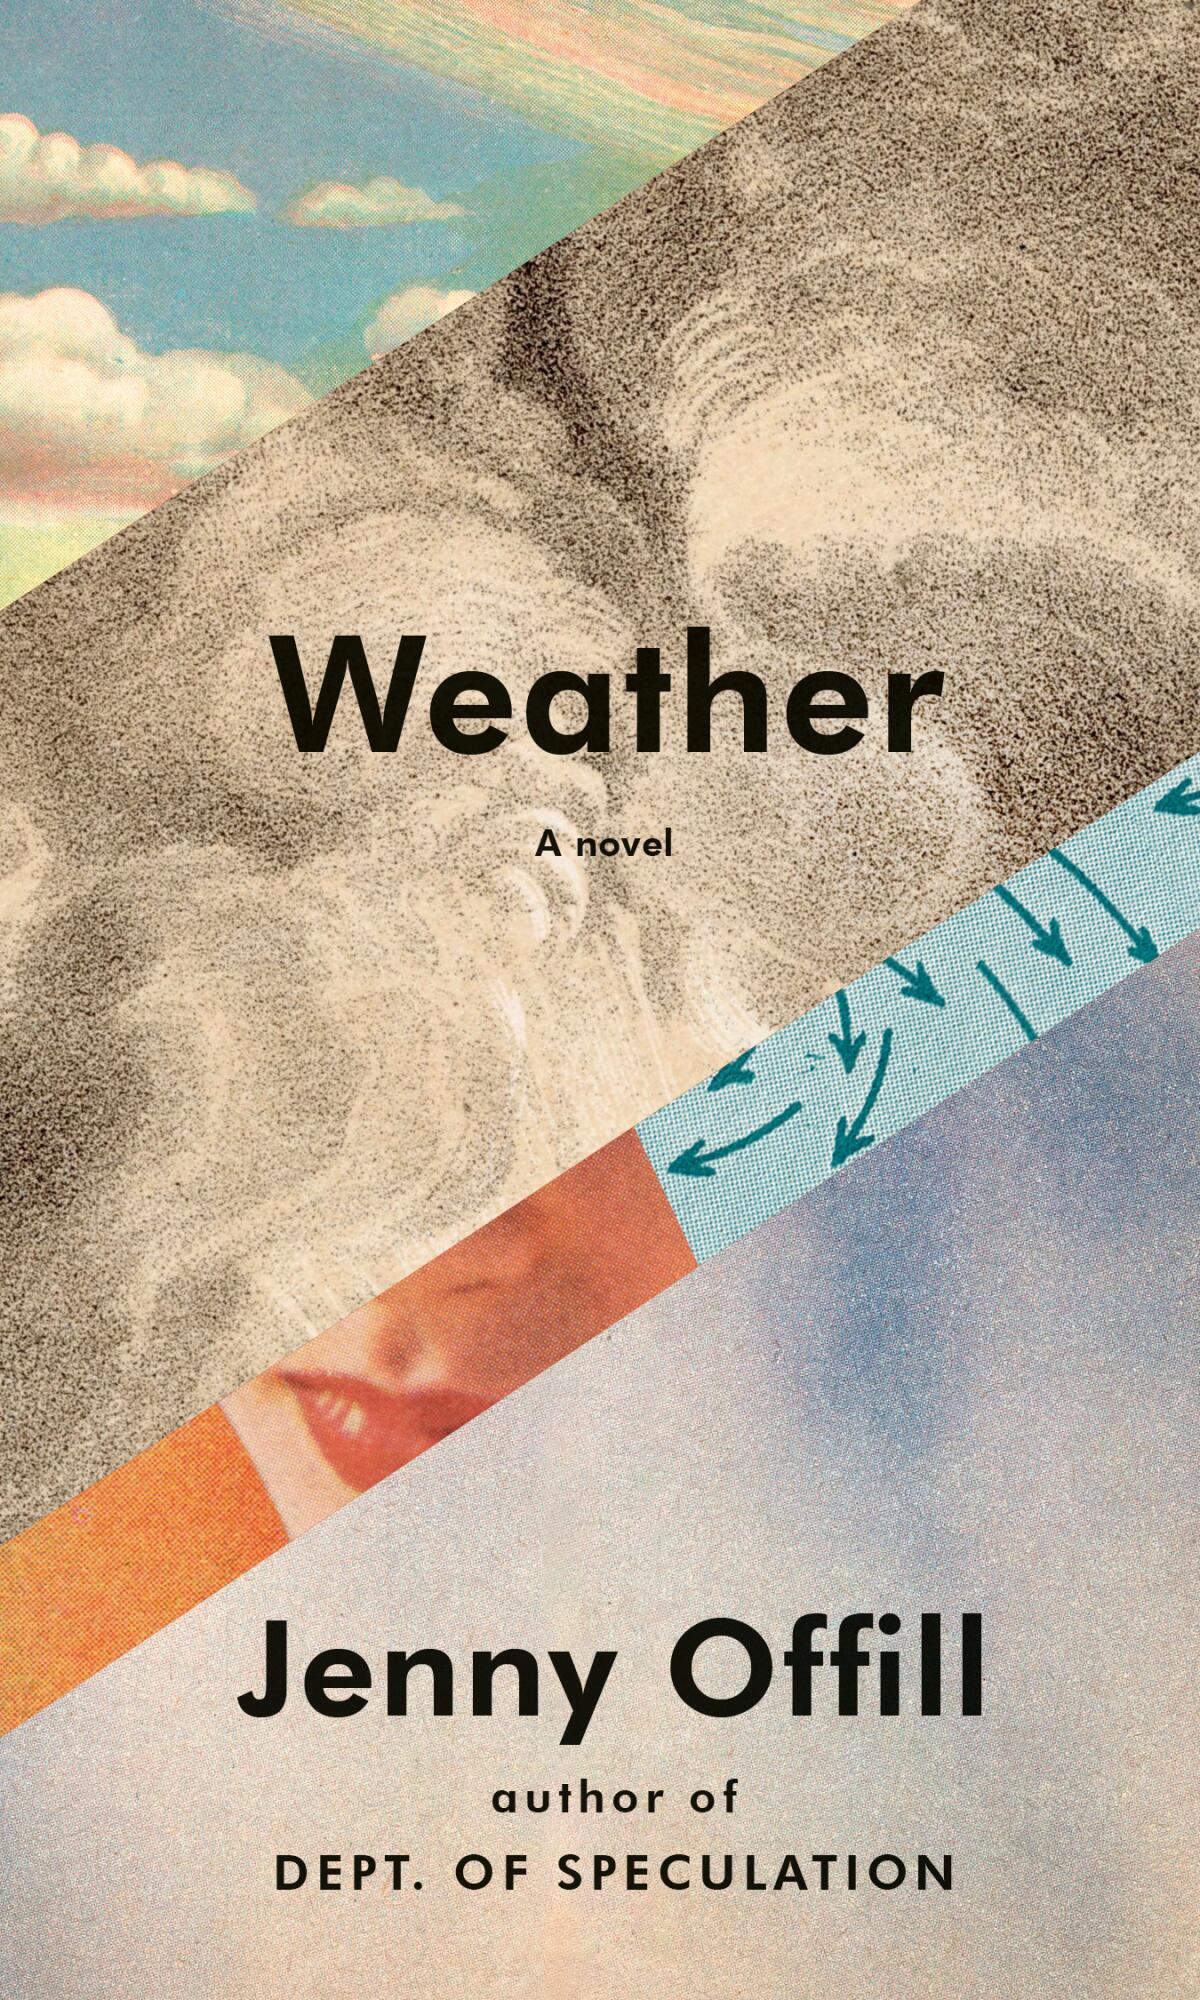 Book jacket for author Jenny Offill¹s "Weather"